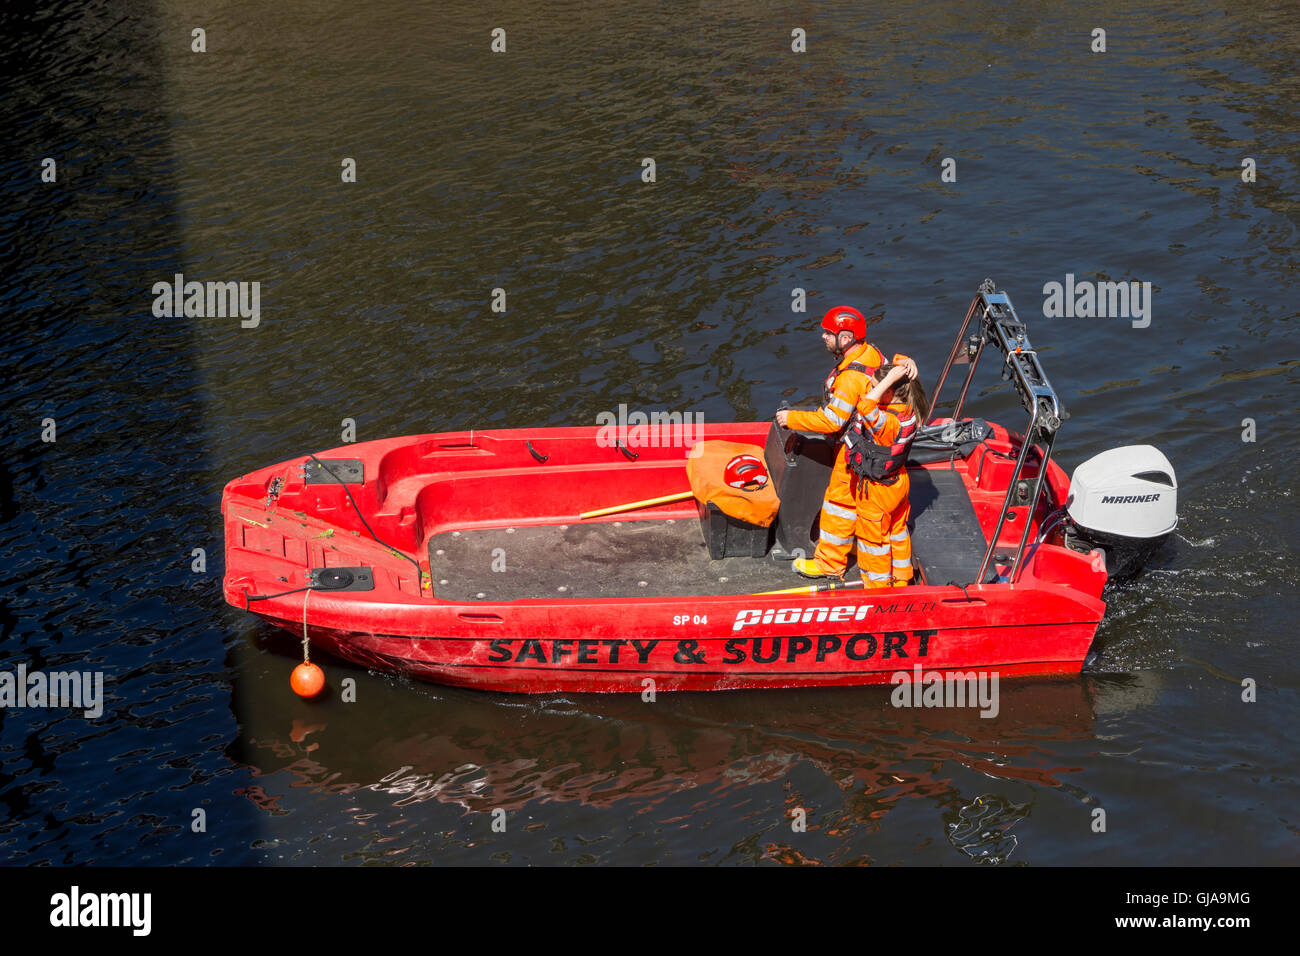 Safety and support boat on the river Irwell, Manchester, England, UK, engaged during the Ordsall Chord railway bridge works. Stock Photo